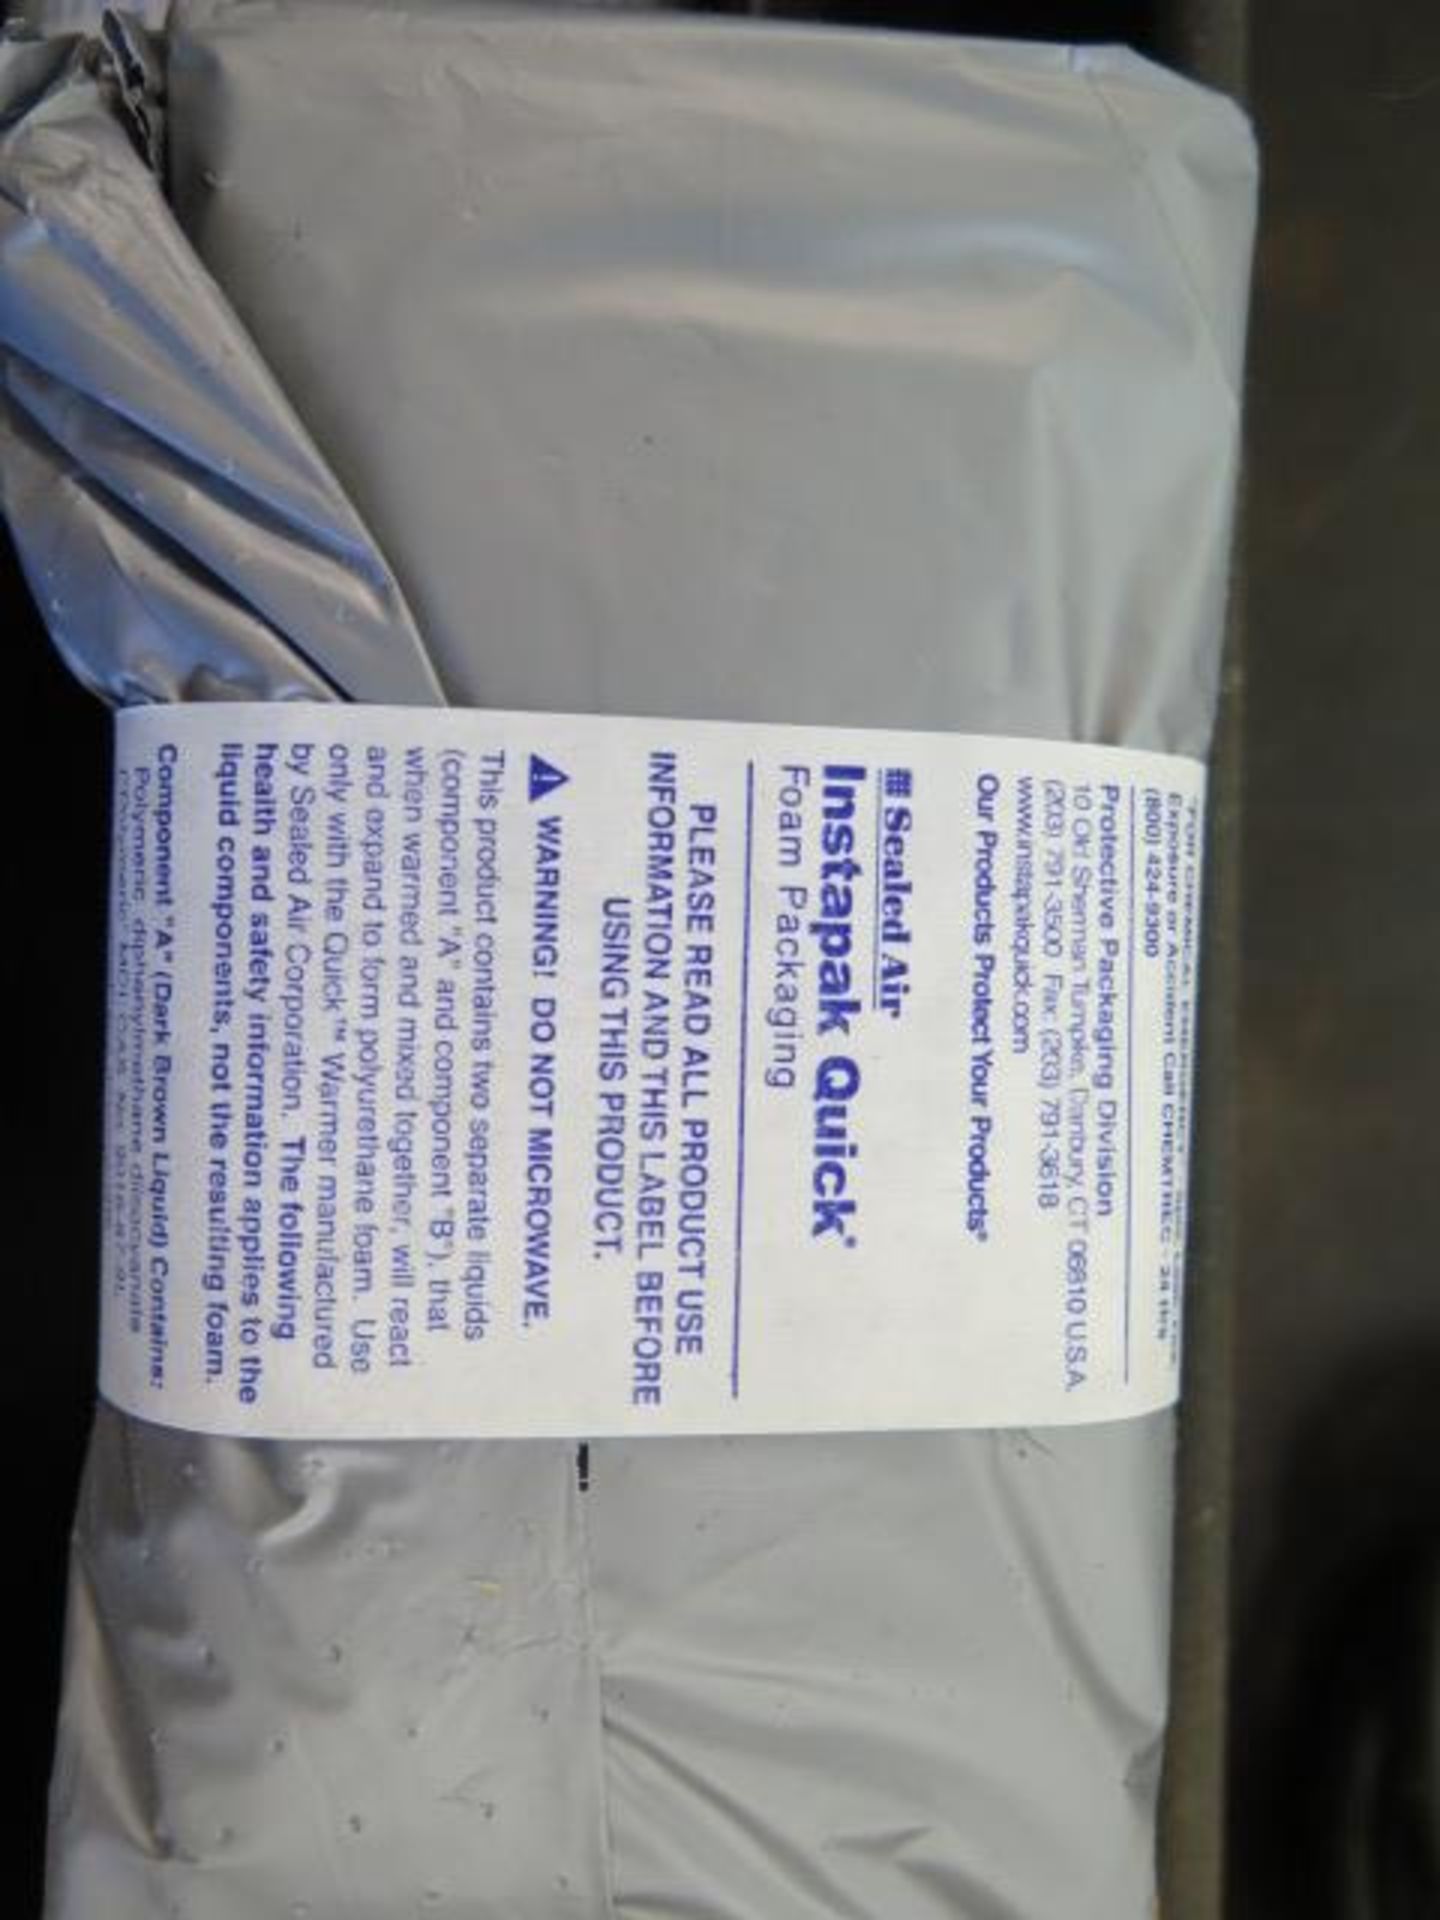 Sealed Air "Instapak Quick" Foam Packaging System (SOLD AS-IS - NO WARRANTY) - Image 7 of 9